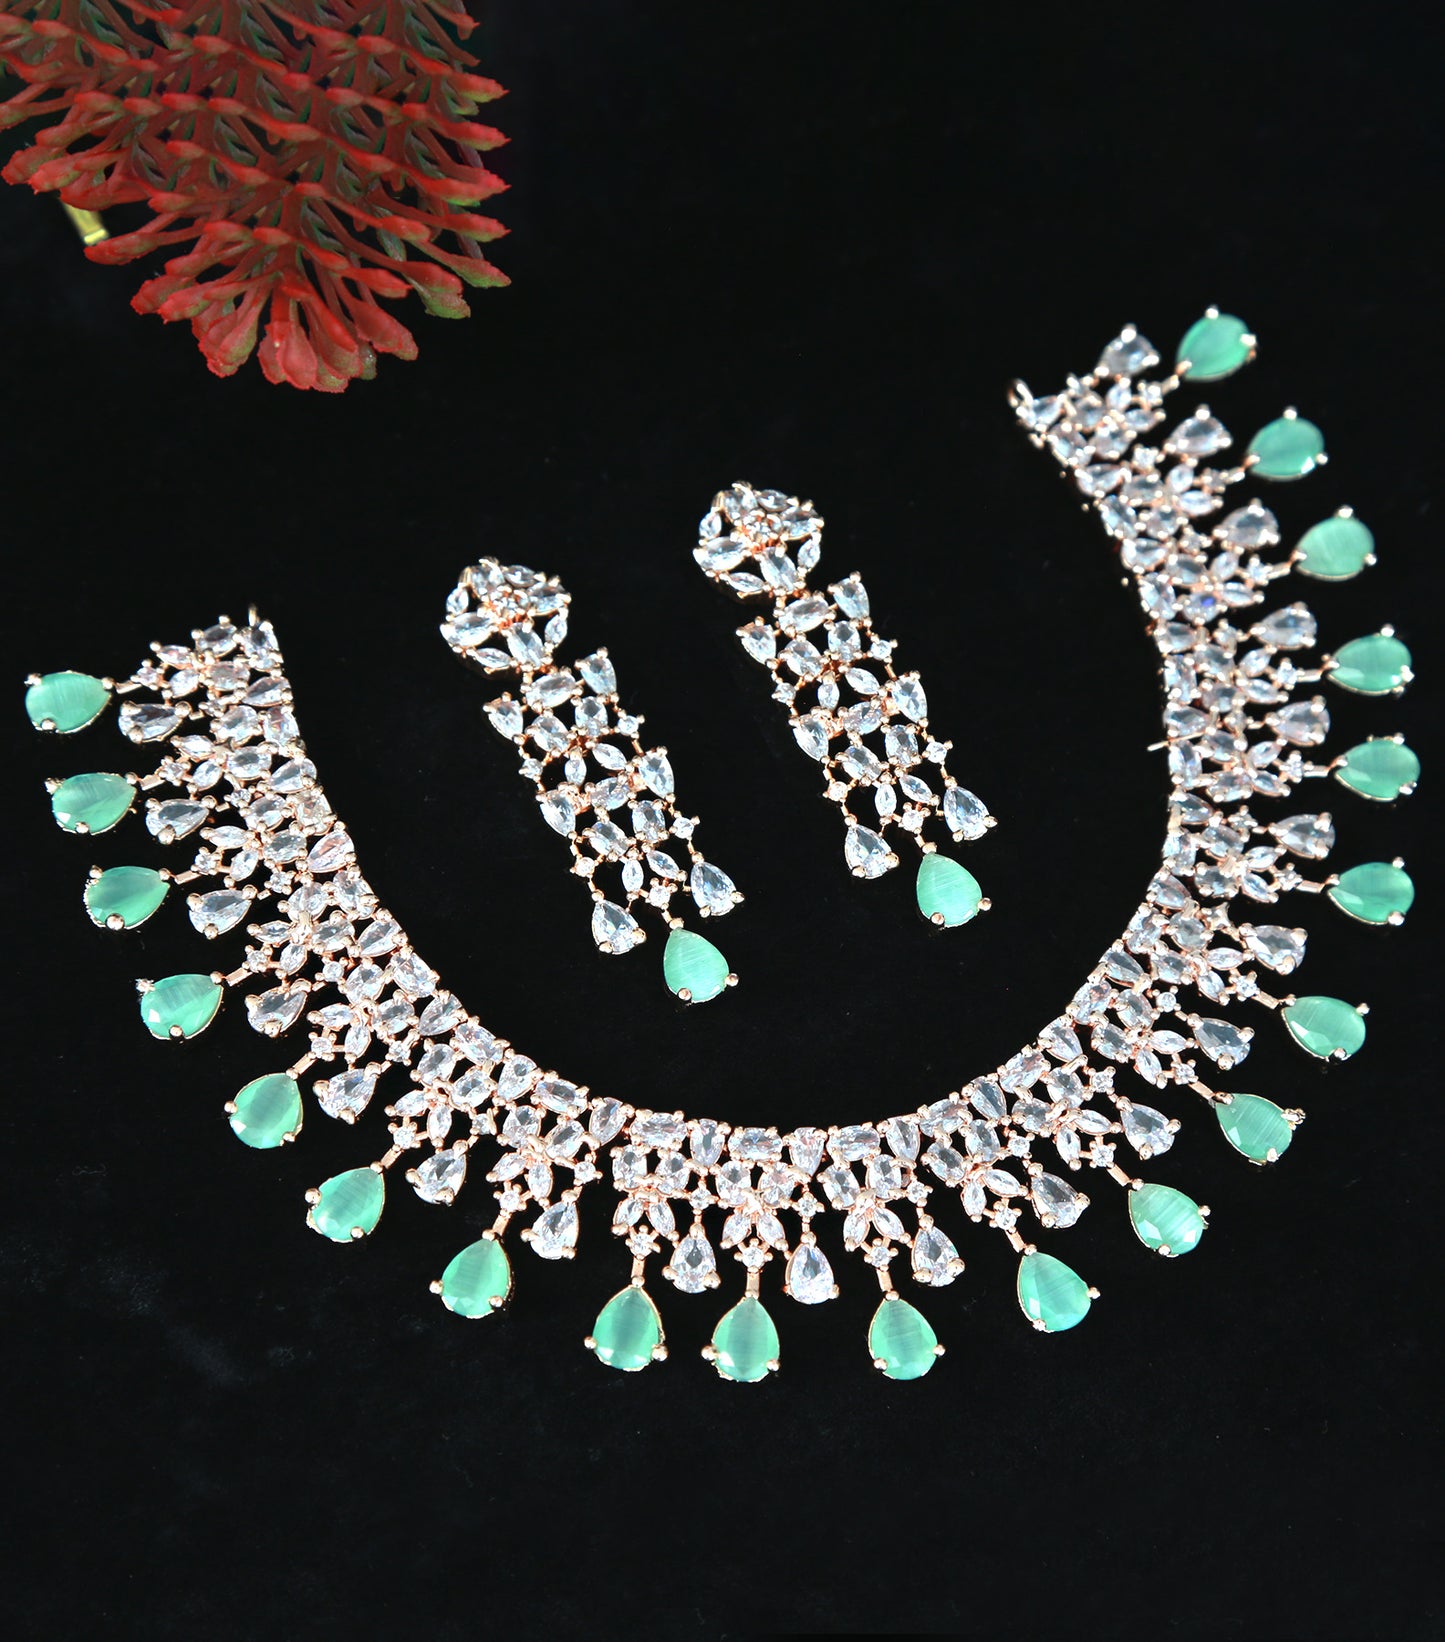 Rose gold American diamond necklace | High Quality CZ Diamonds Mint Green stone Necklace Earrings Set